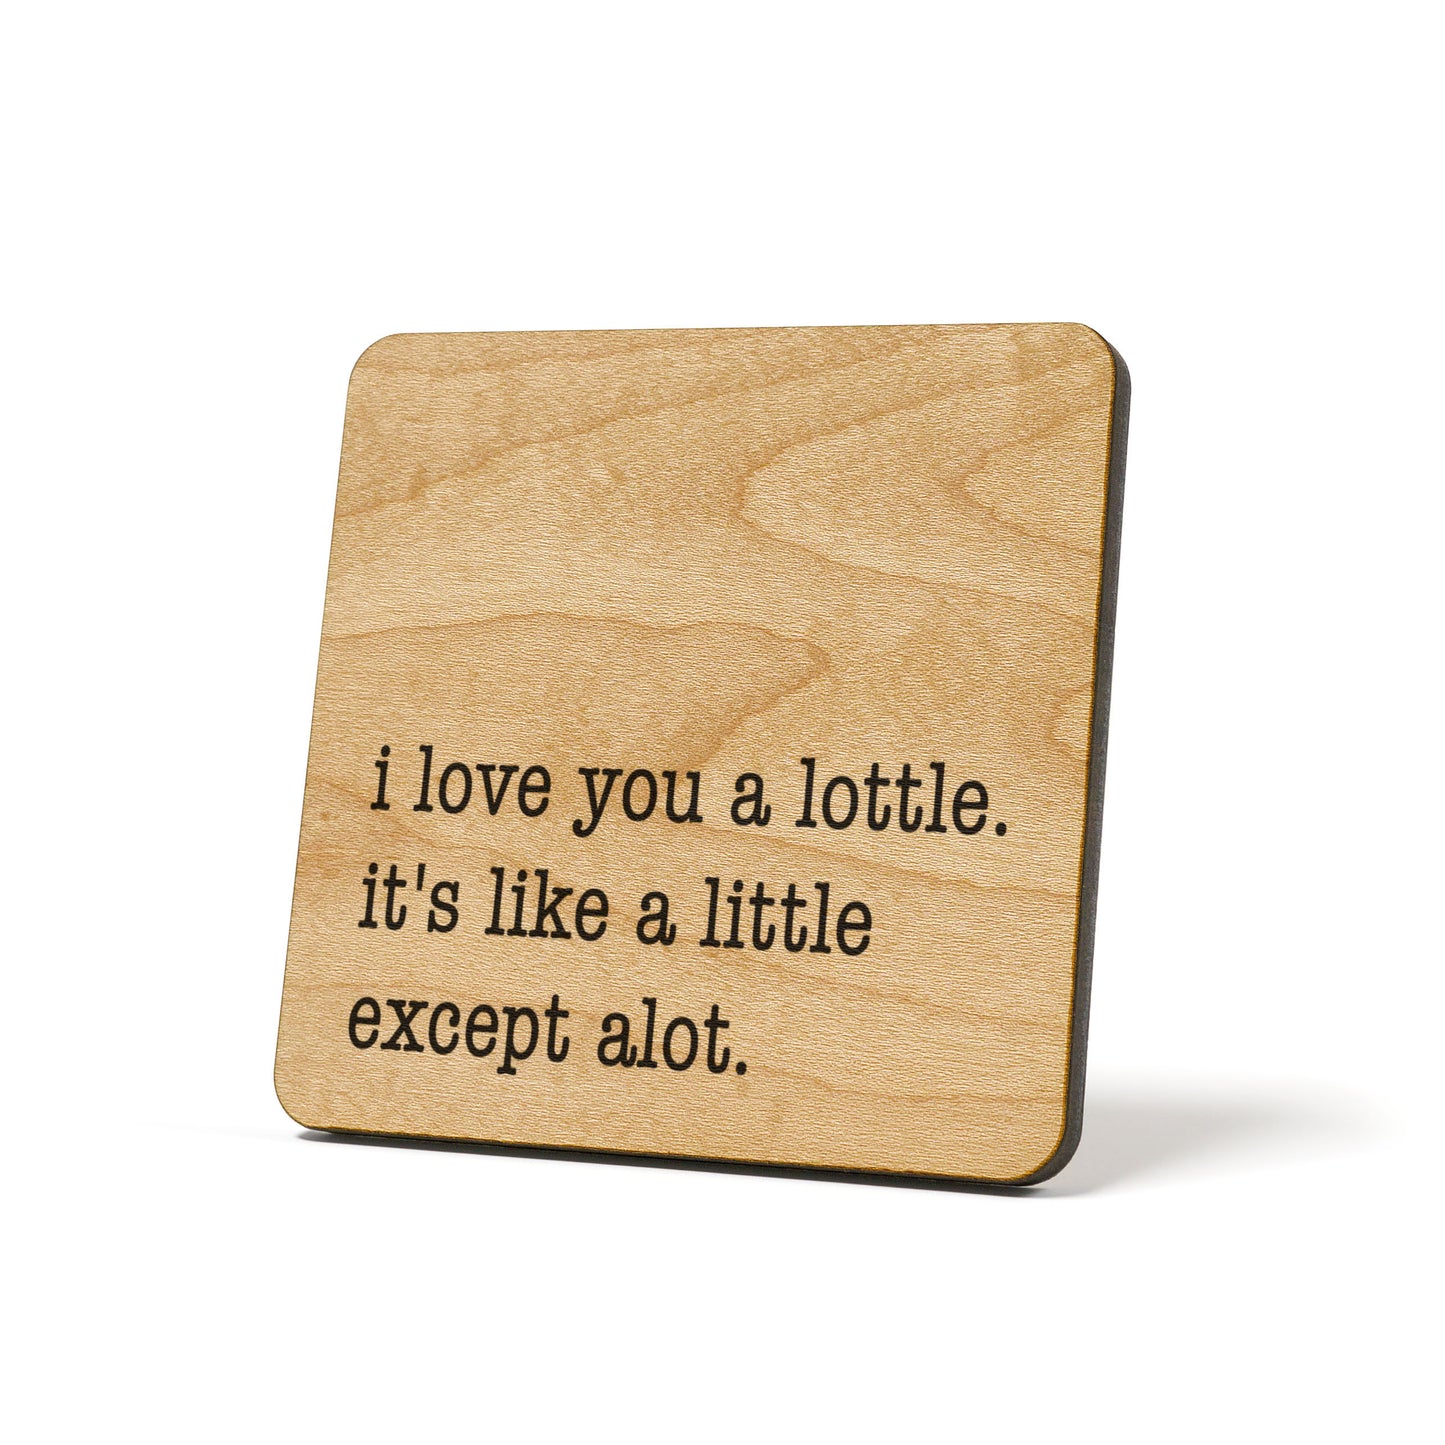 I love you a lottle. It's like a little except alot. Quote Coaster